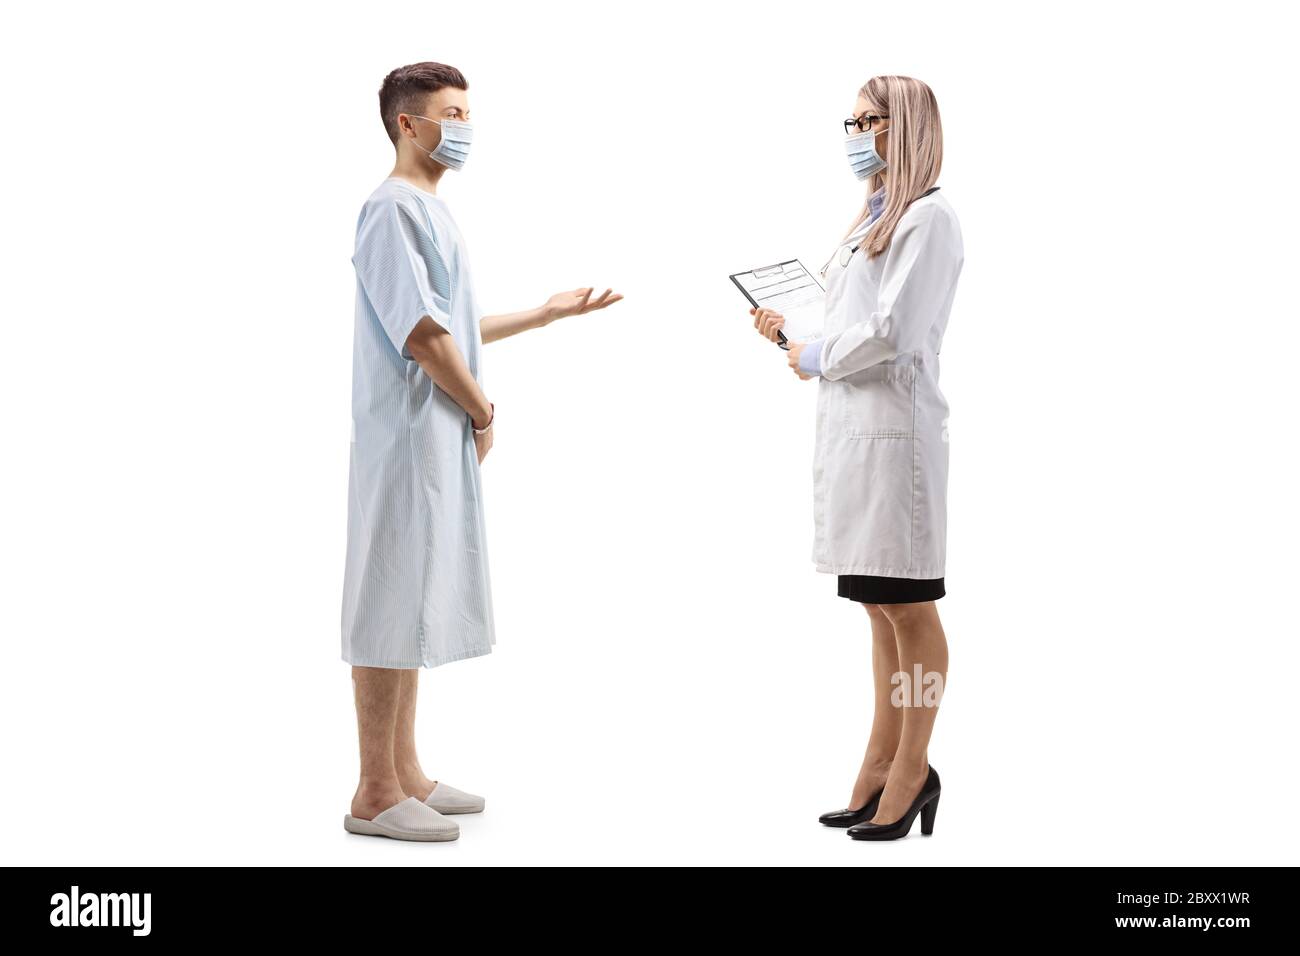 Full length profile shot of a young male patient talking to a female doctor and wearing protective masks isolated on white background Stock Photo